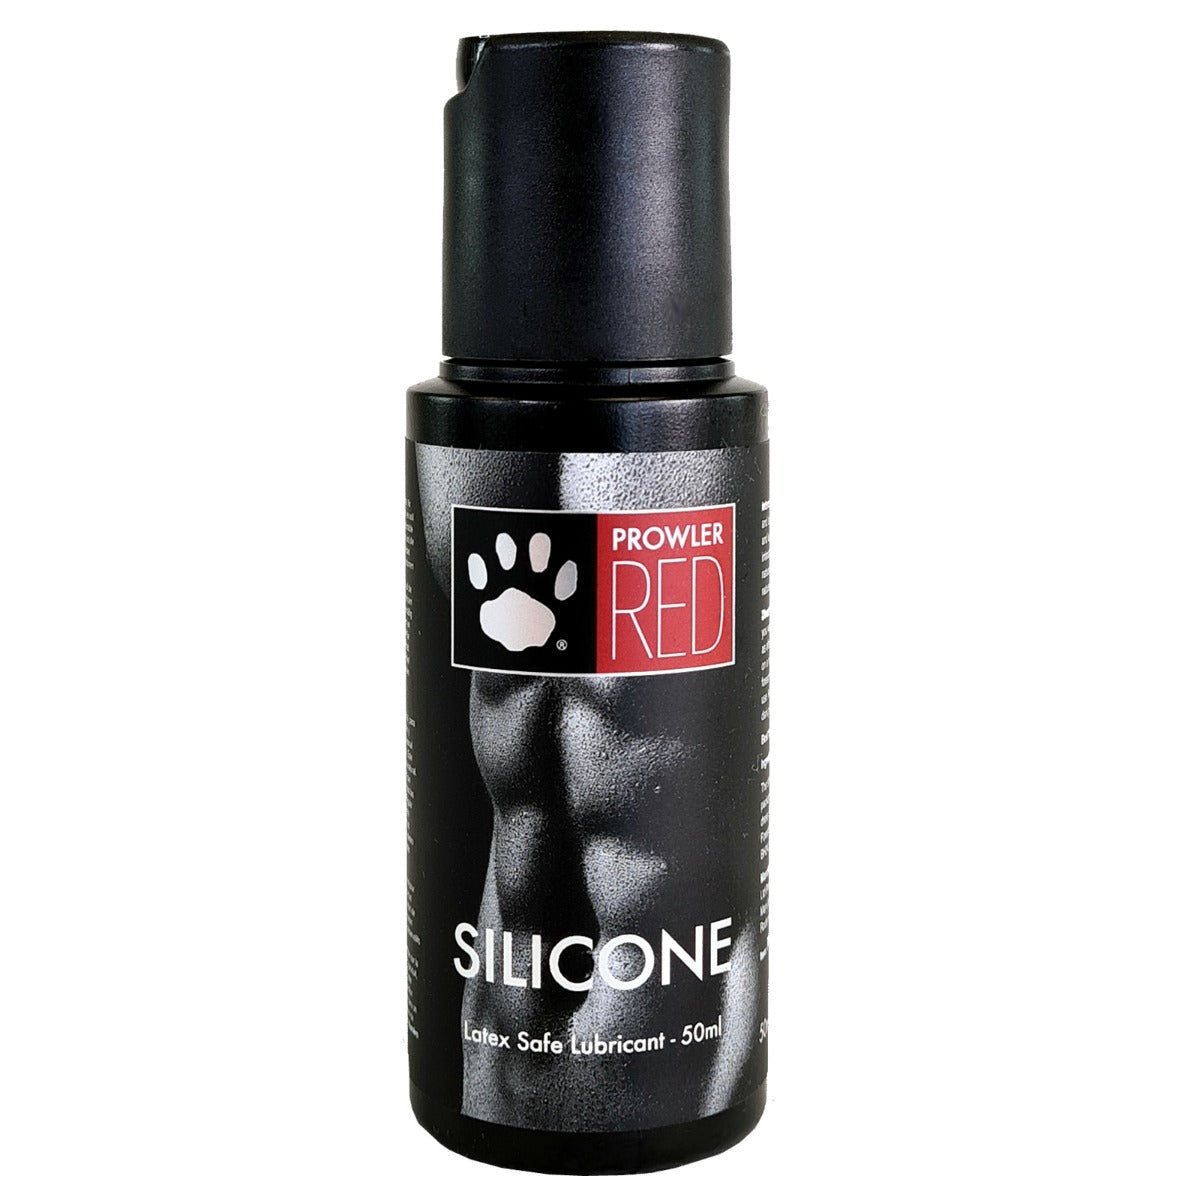 Prowler RED Silicone silicone Lube (7021169279140)